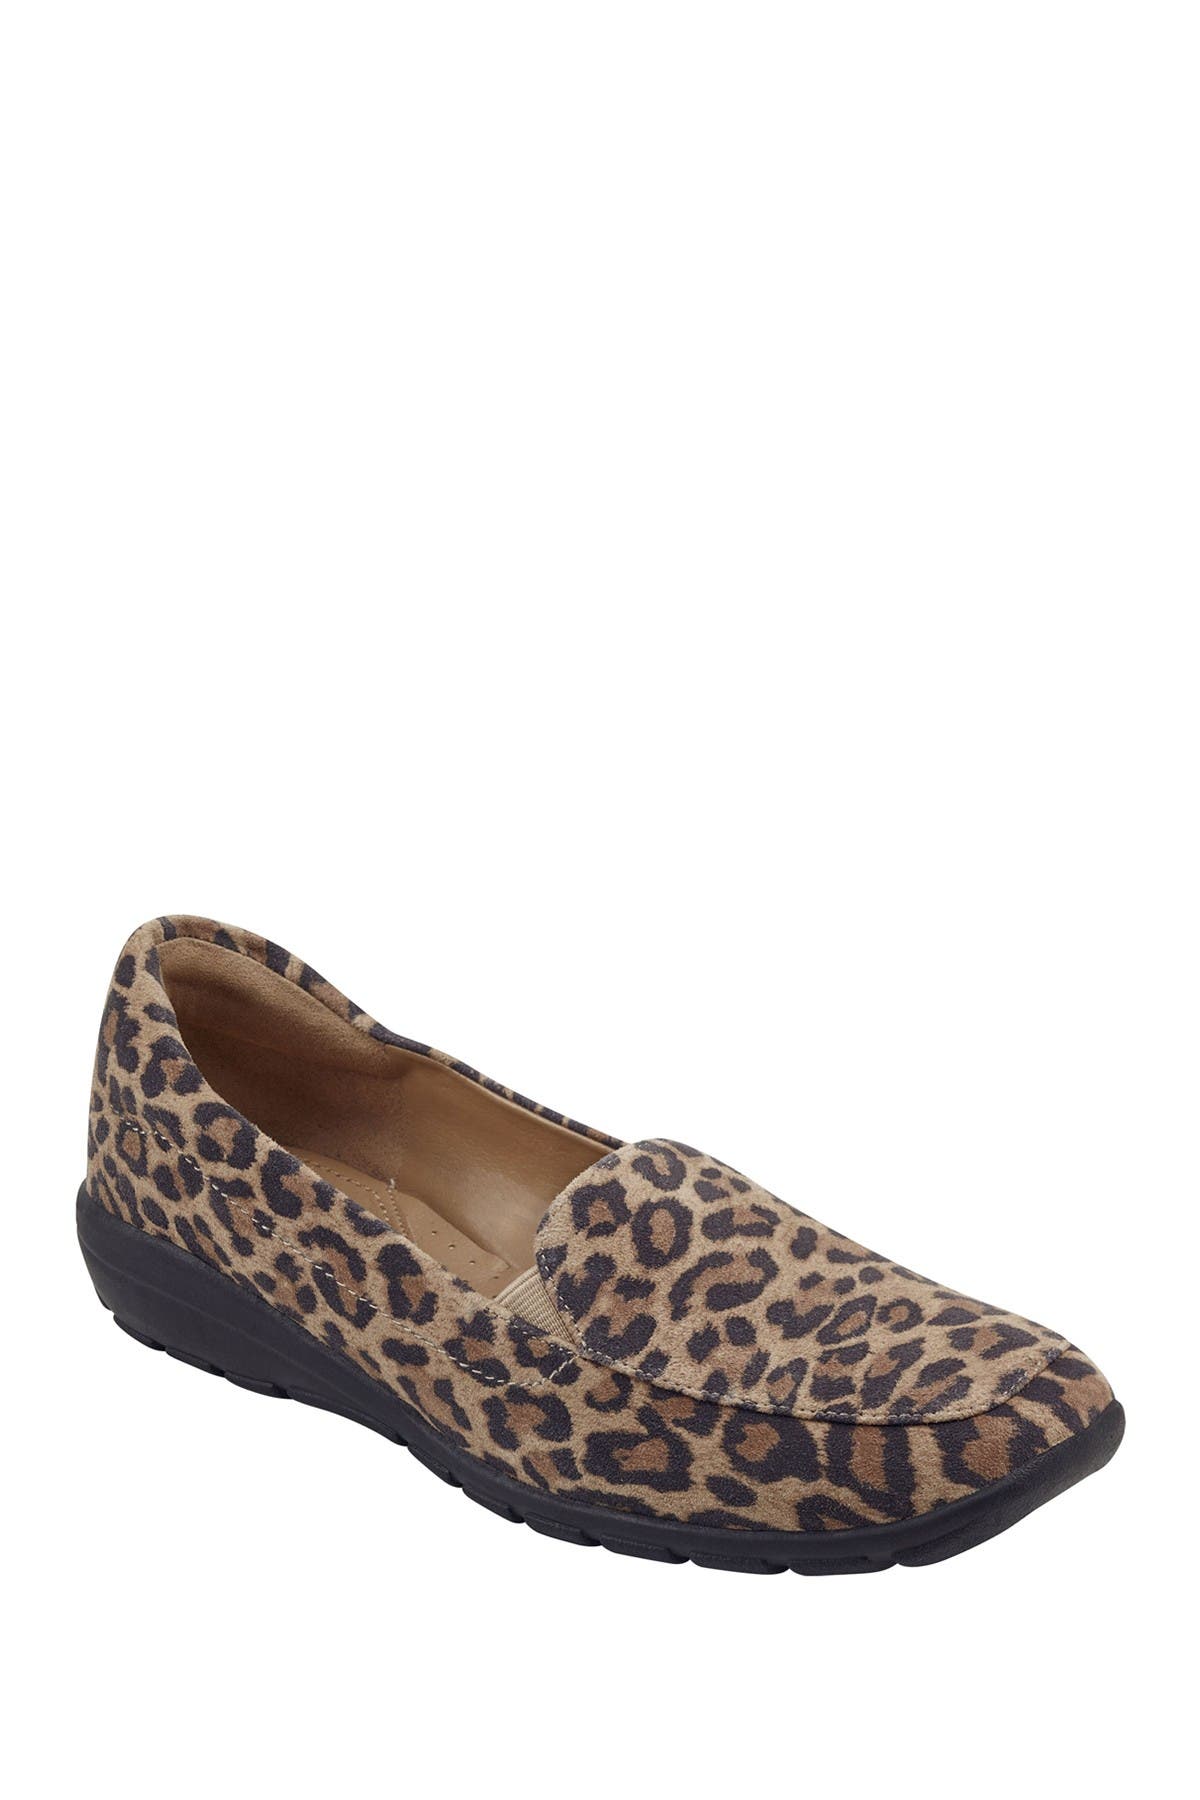 leopard loafers canada